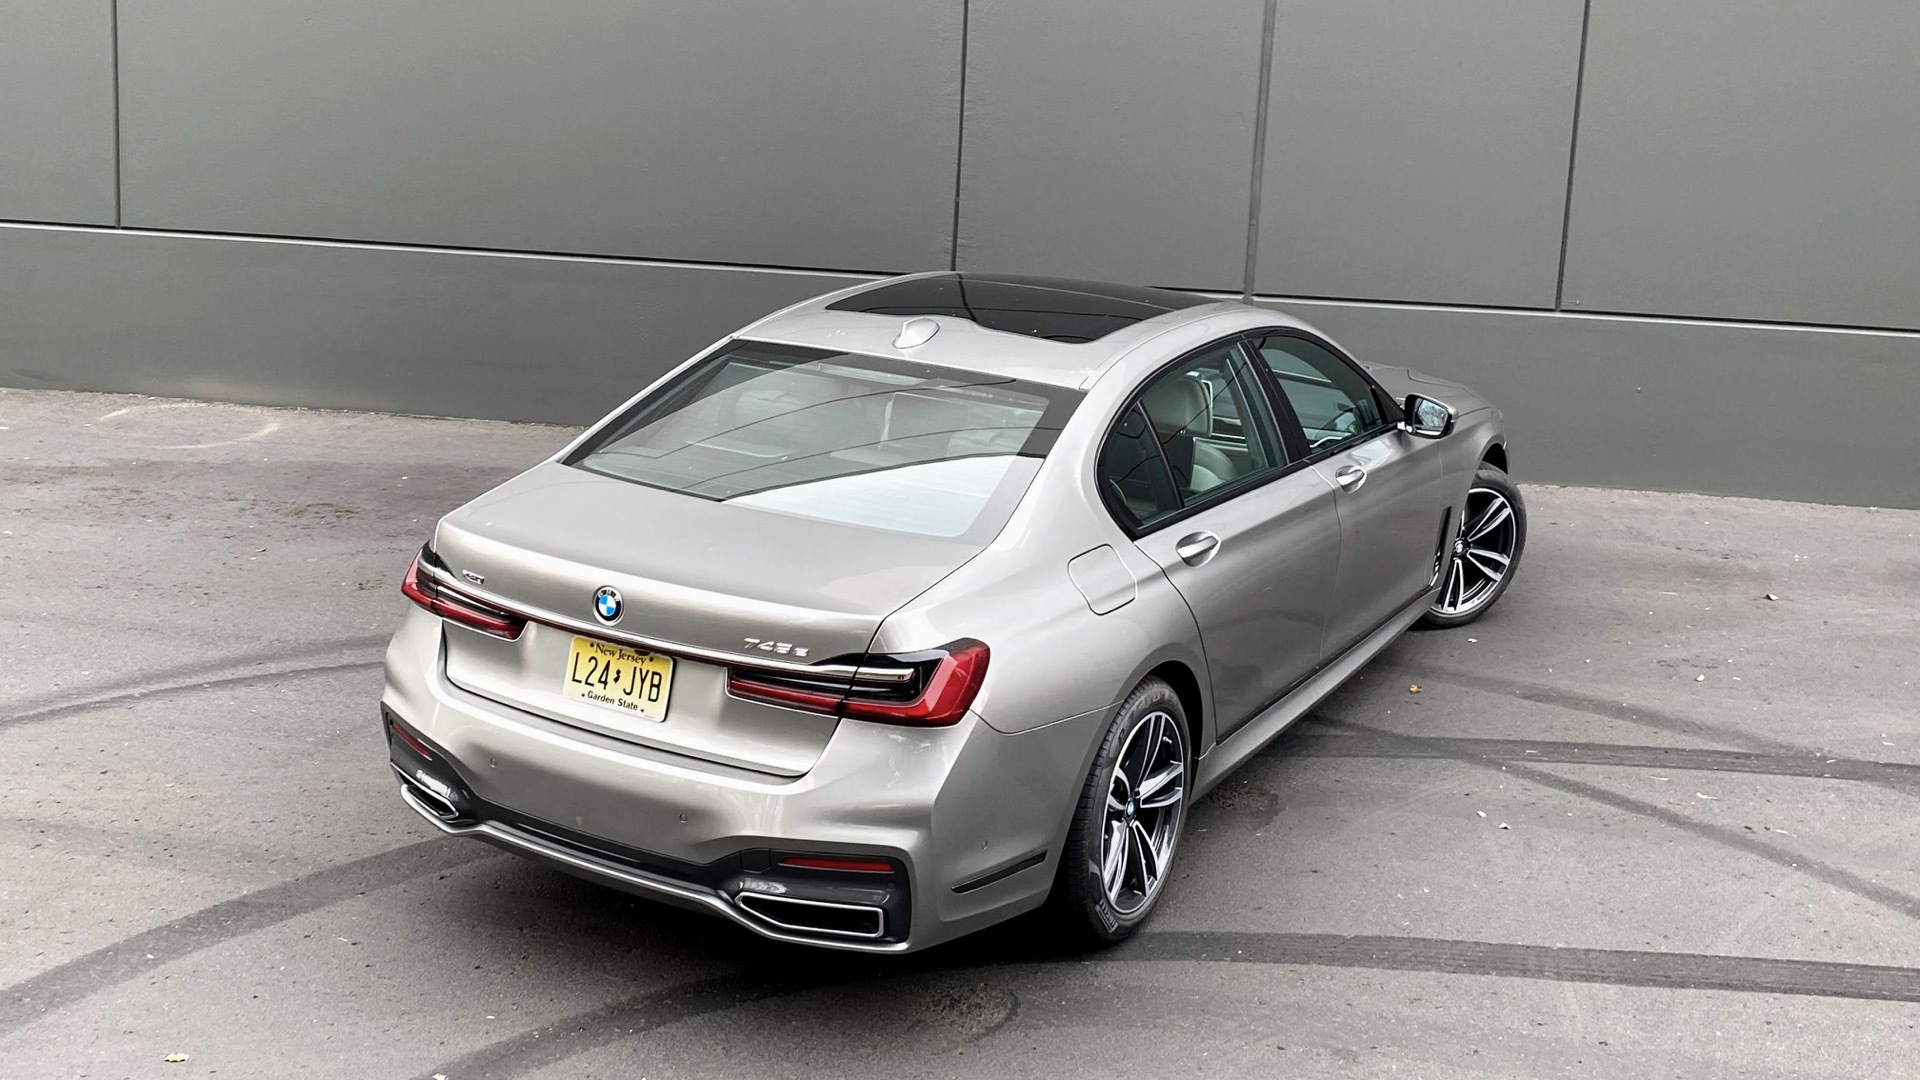 First drive review: 2020 BMW 745e plug-in hybrid luxury sedan goes your